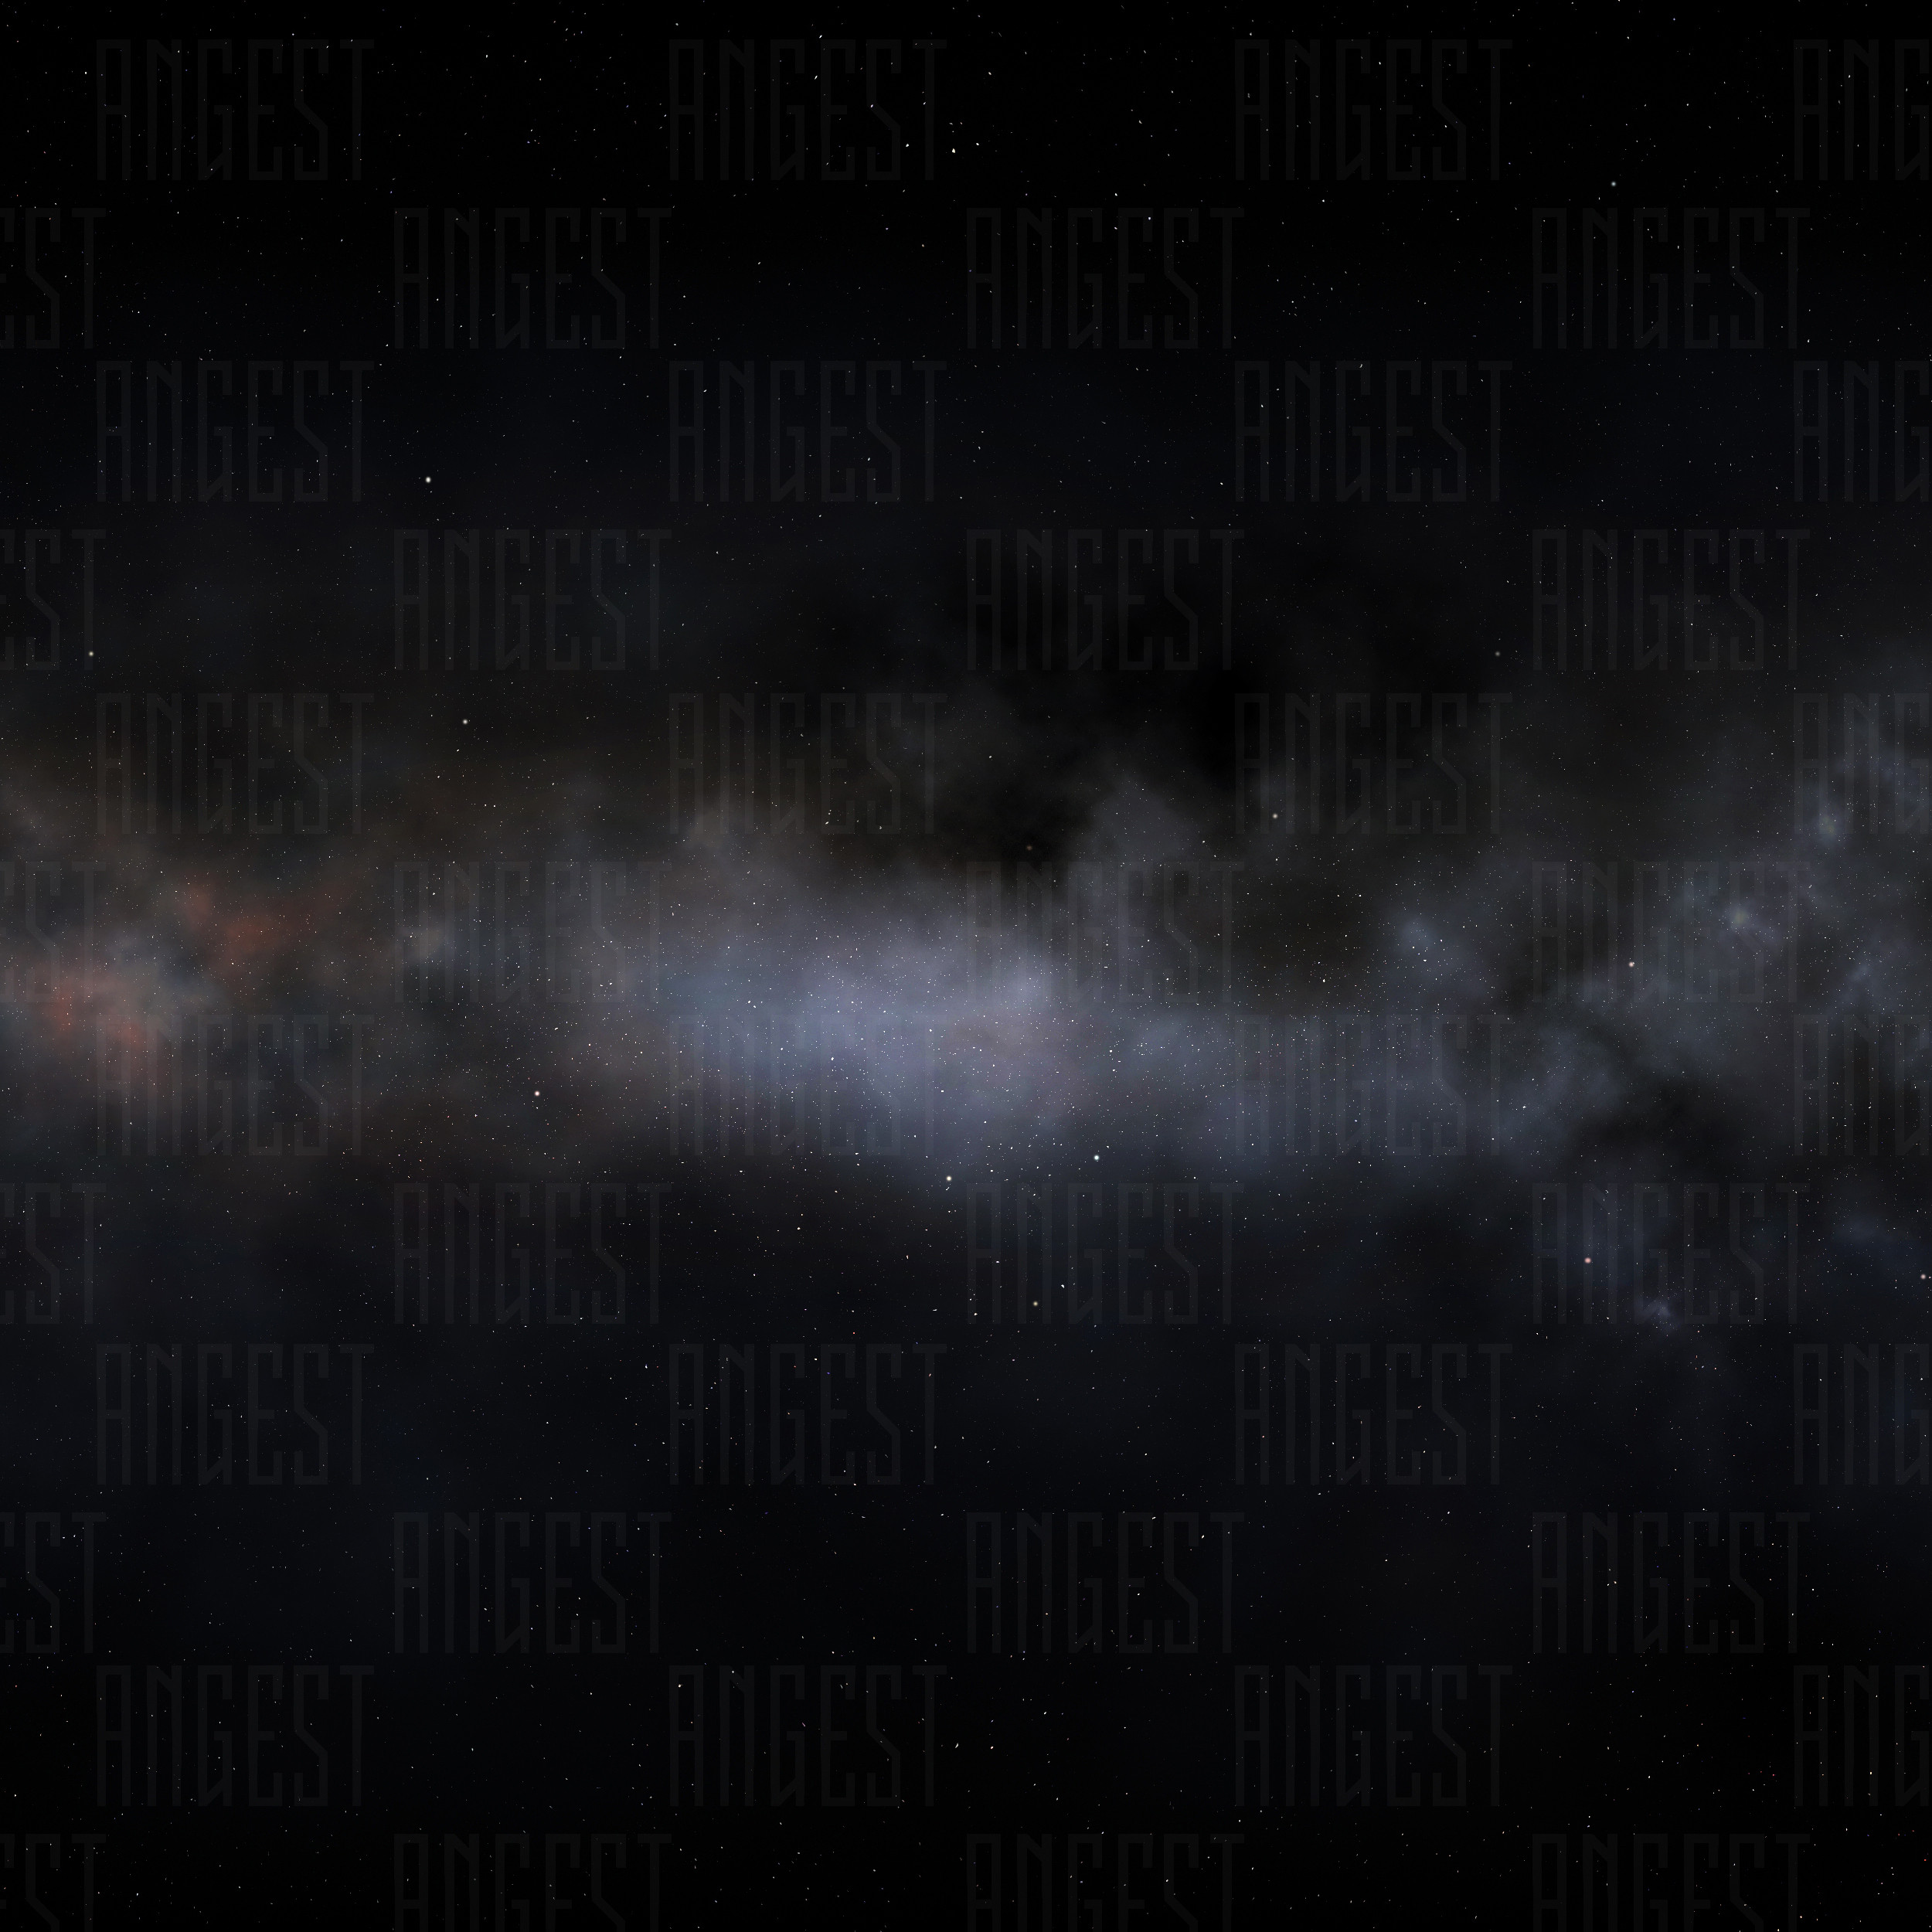 Croped Skybox in Full resolution